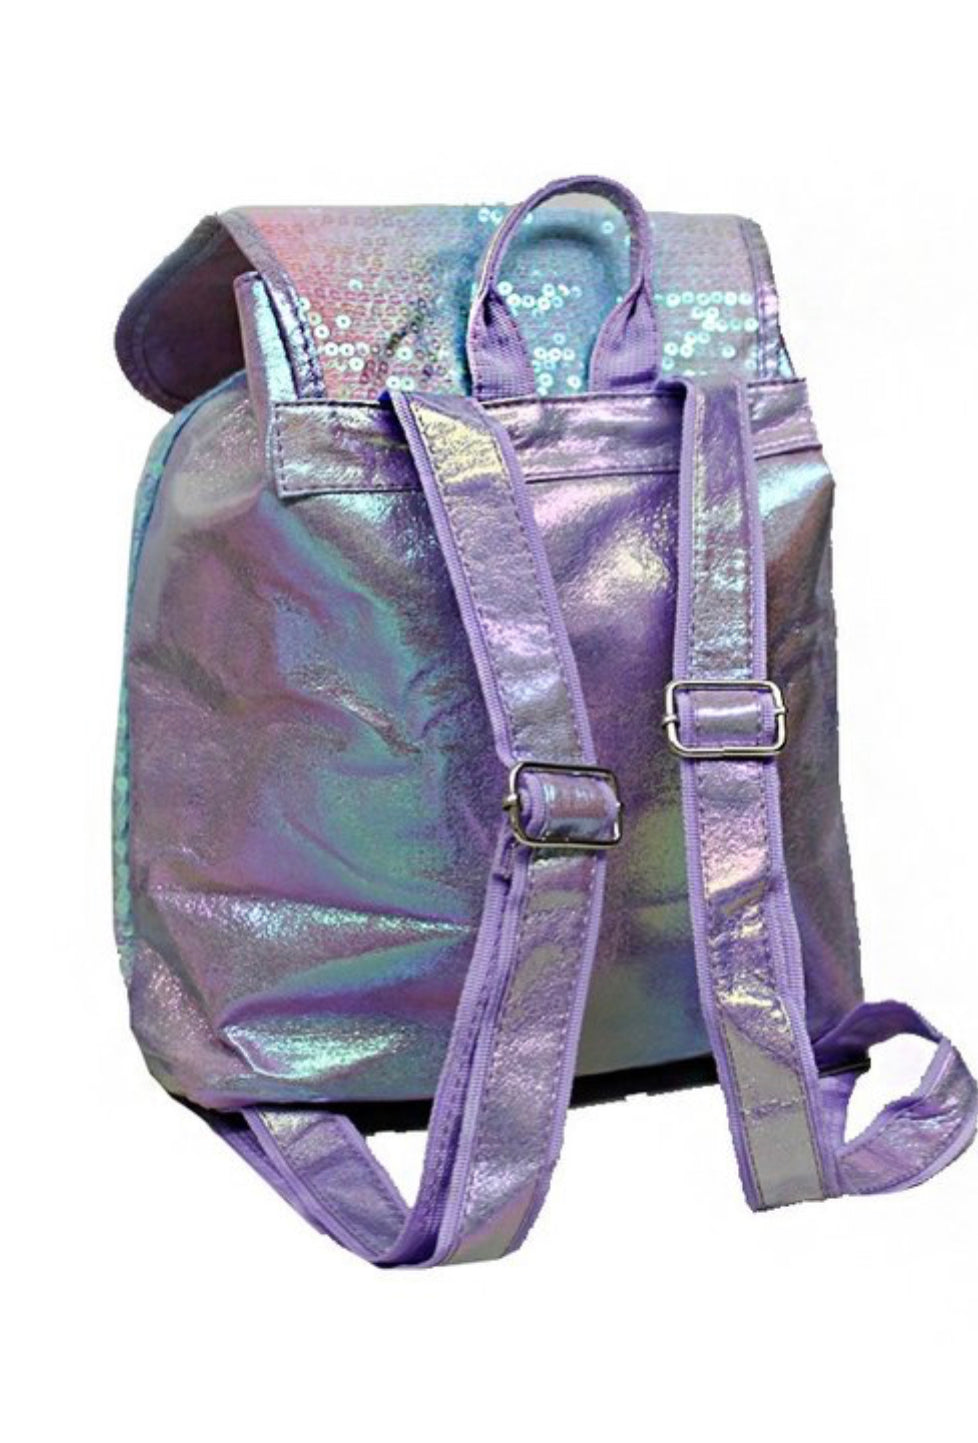 PURPLE SEQUIN BACK PACK WITH POM POM